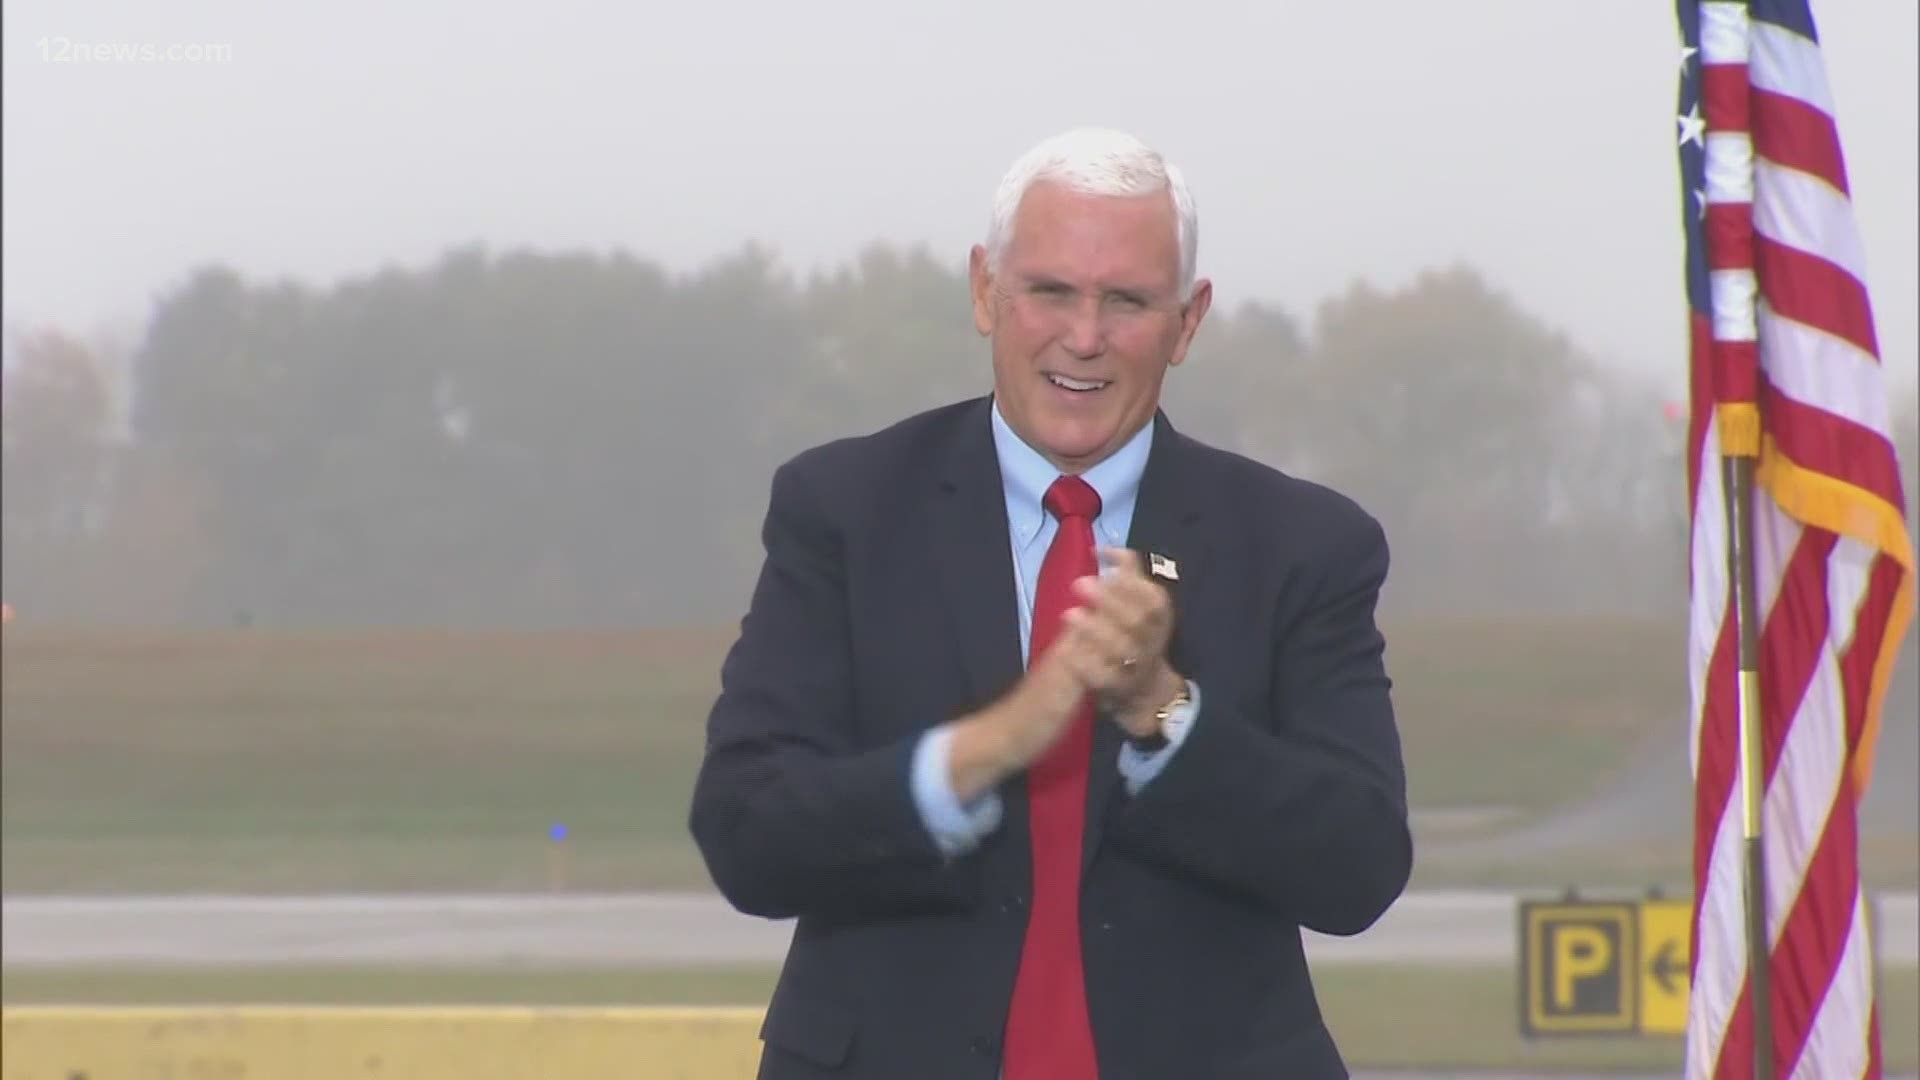 Vice President Mike Pence will return to Arizona on Friday to host more rallies ahead of Election Day. Team 12's Jen Wahl has the latest.